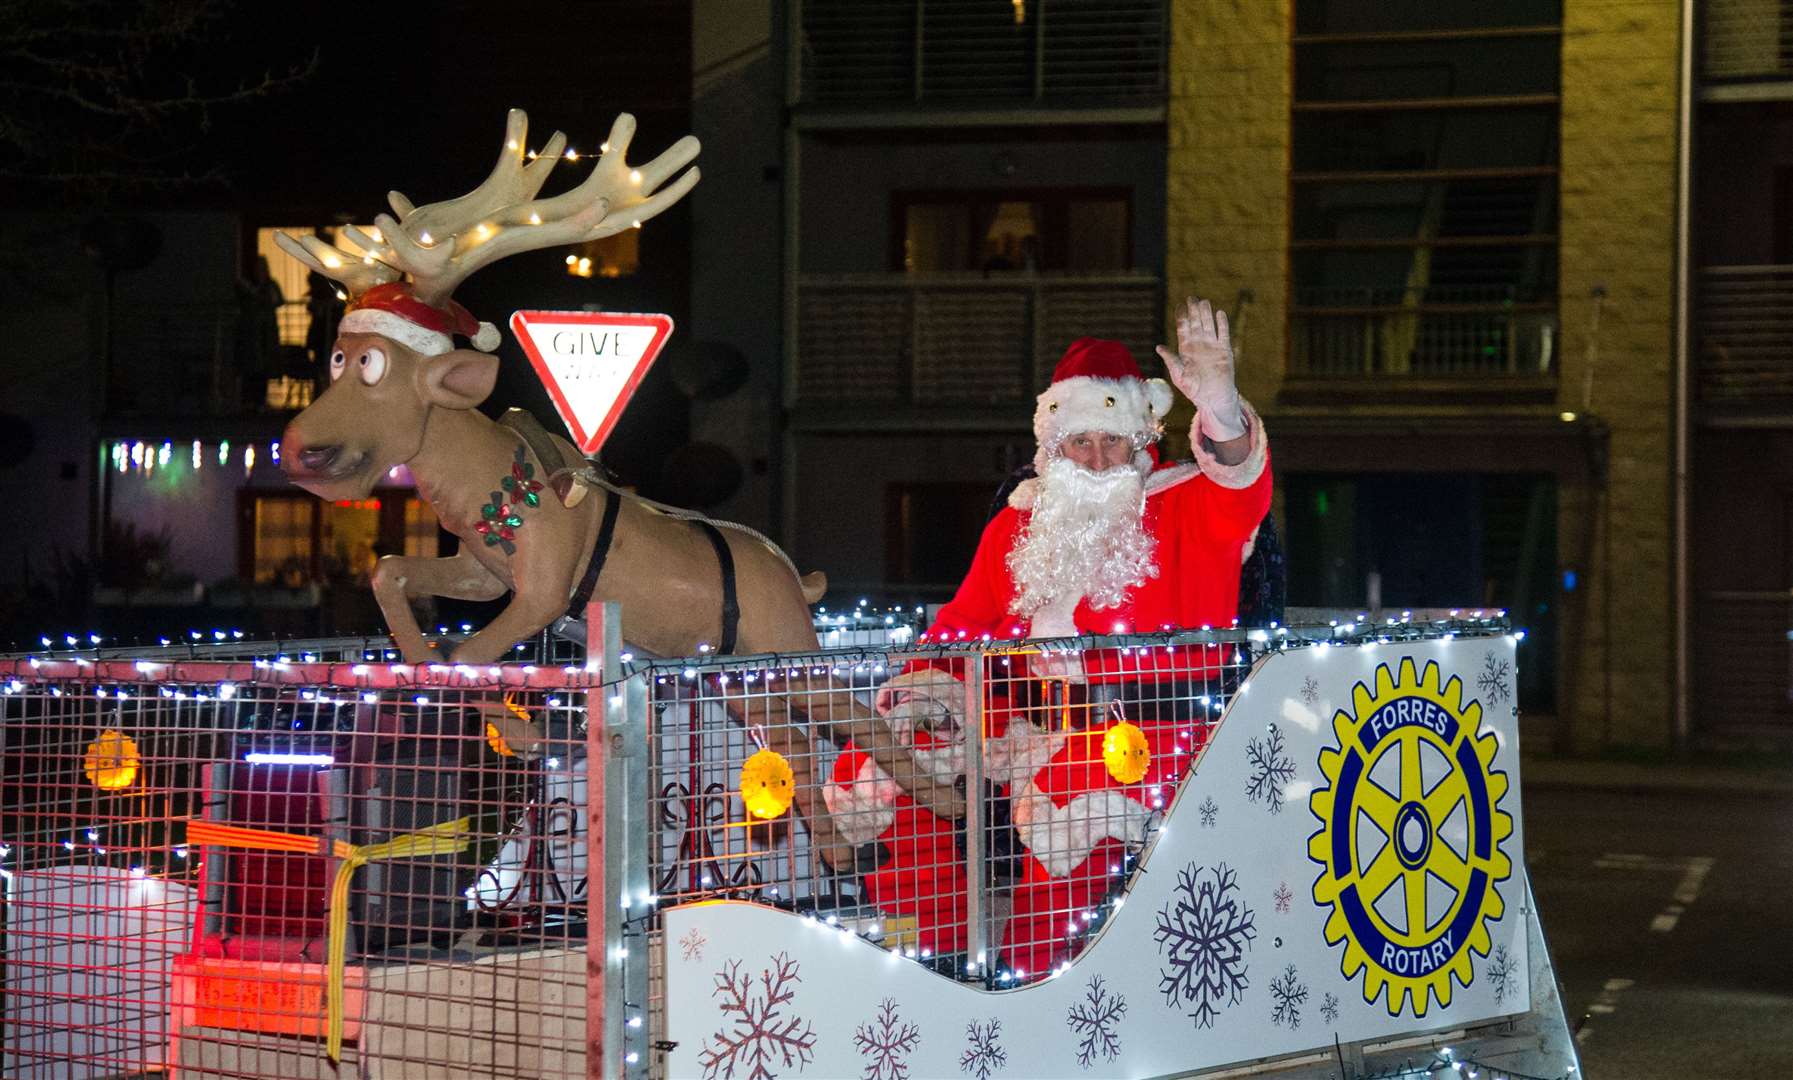 Rotary club of Forres are holding sleigh tours around Forres this week.